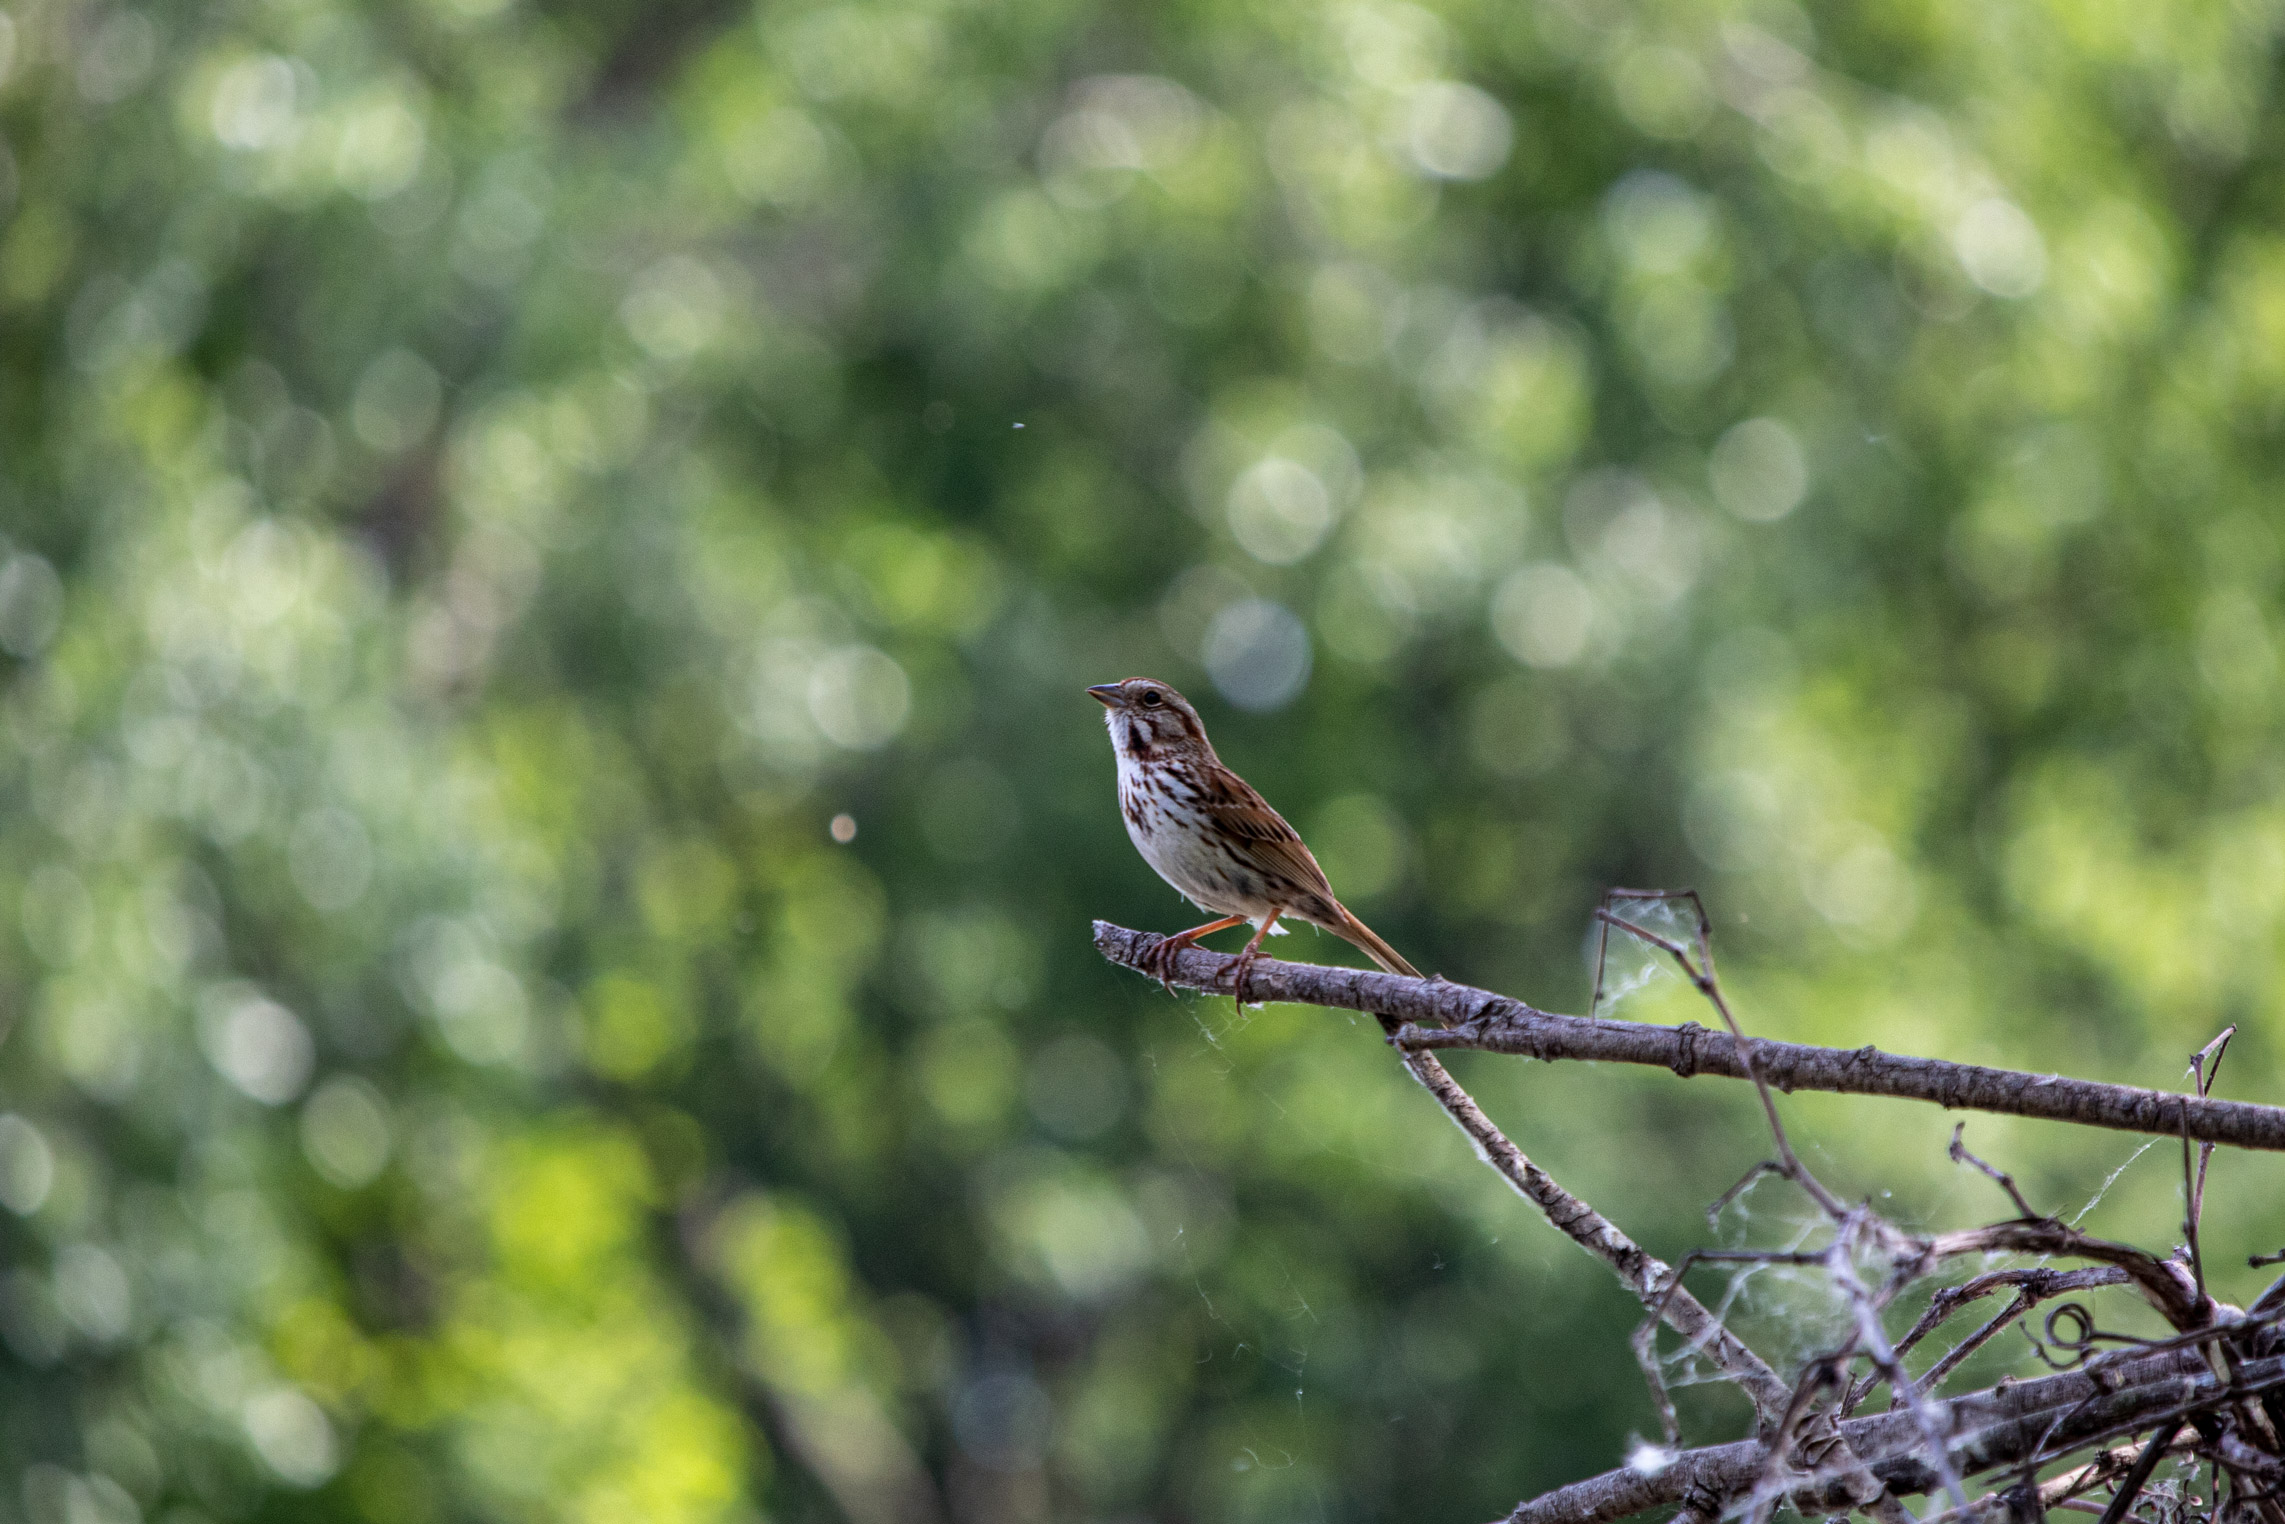 Small bird balanced on the end of a stick and looking to the side in front of out-of-focus greenery